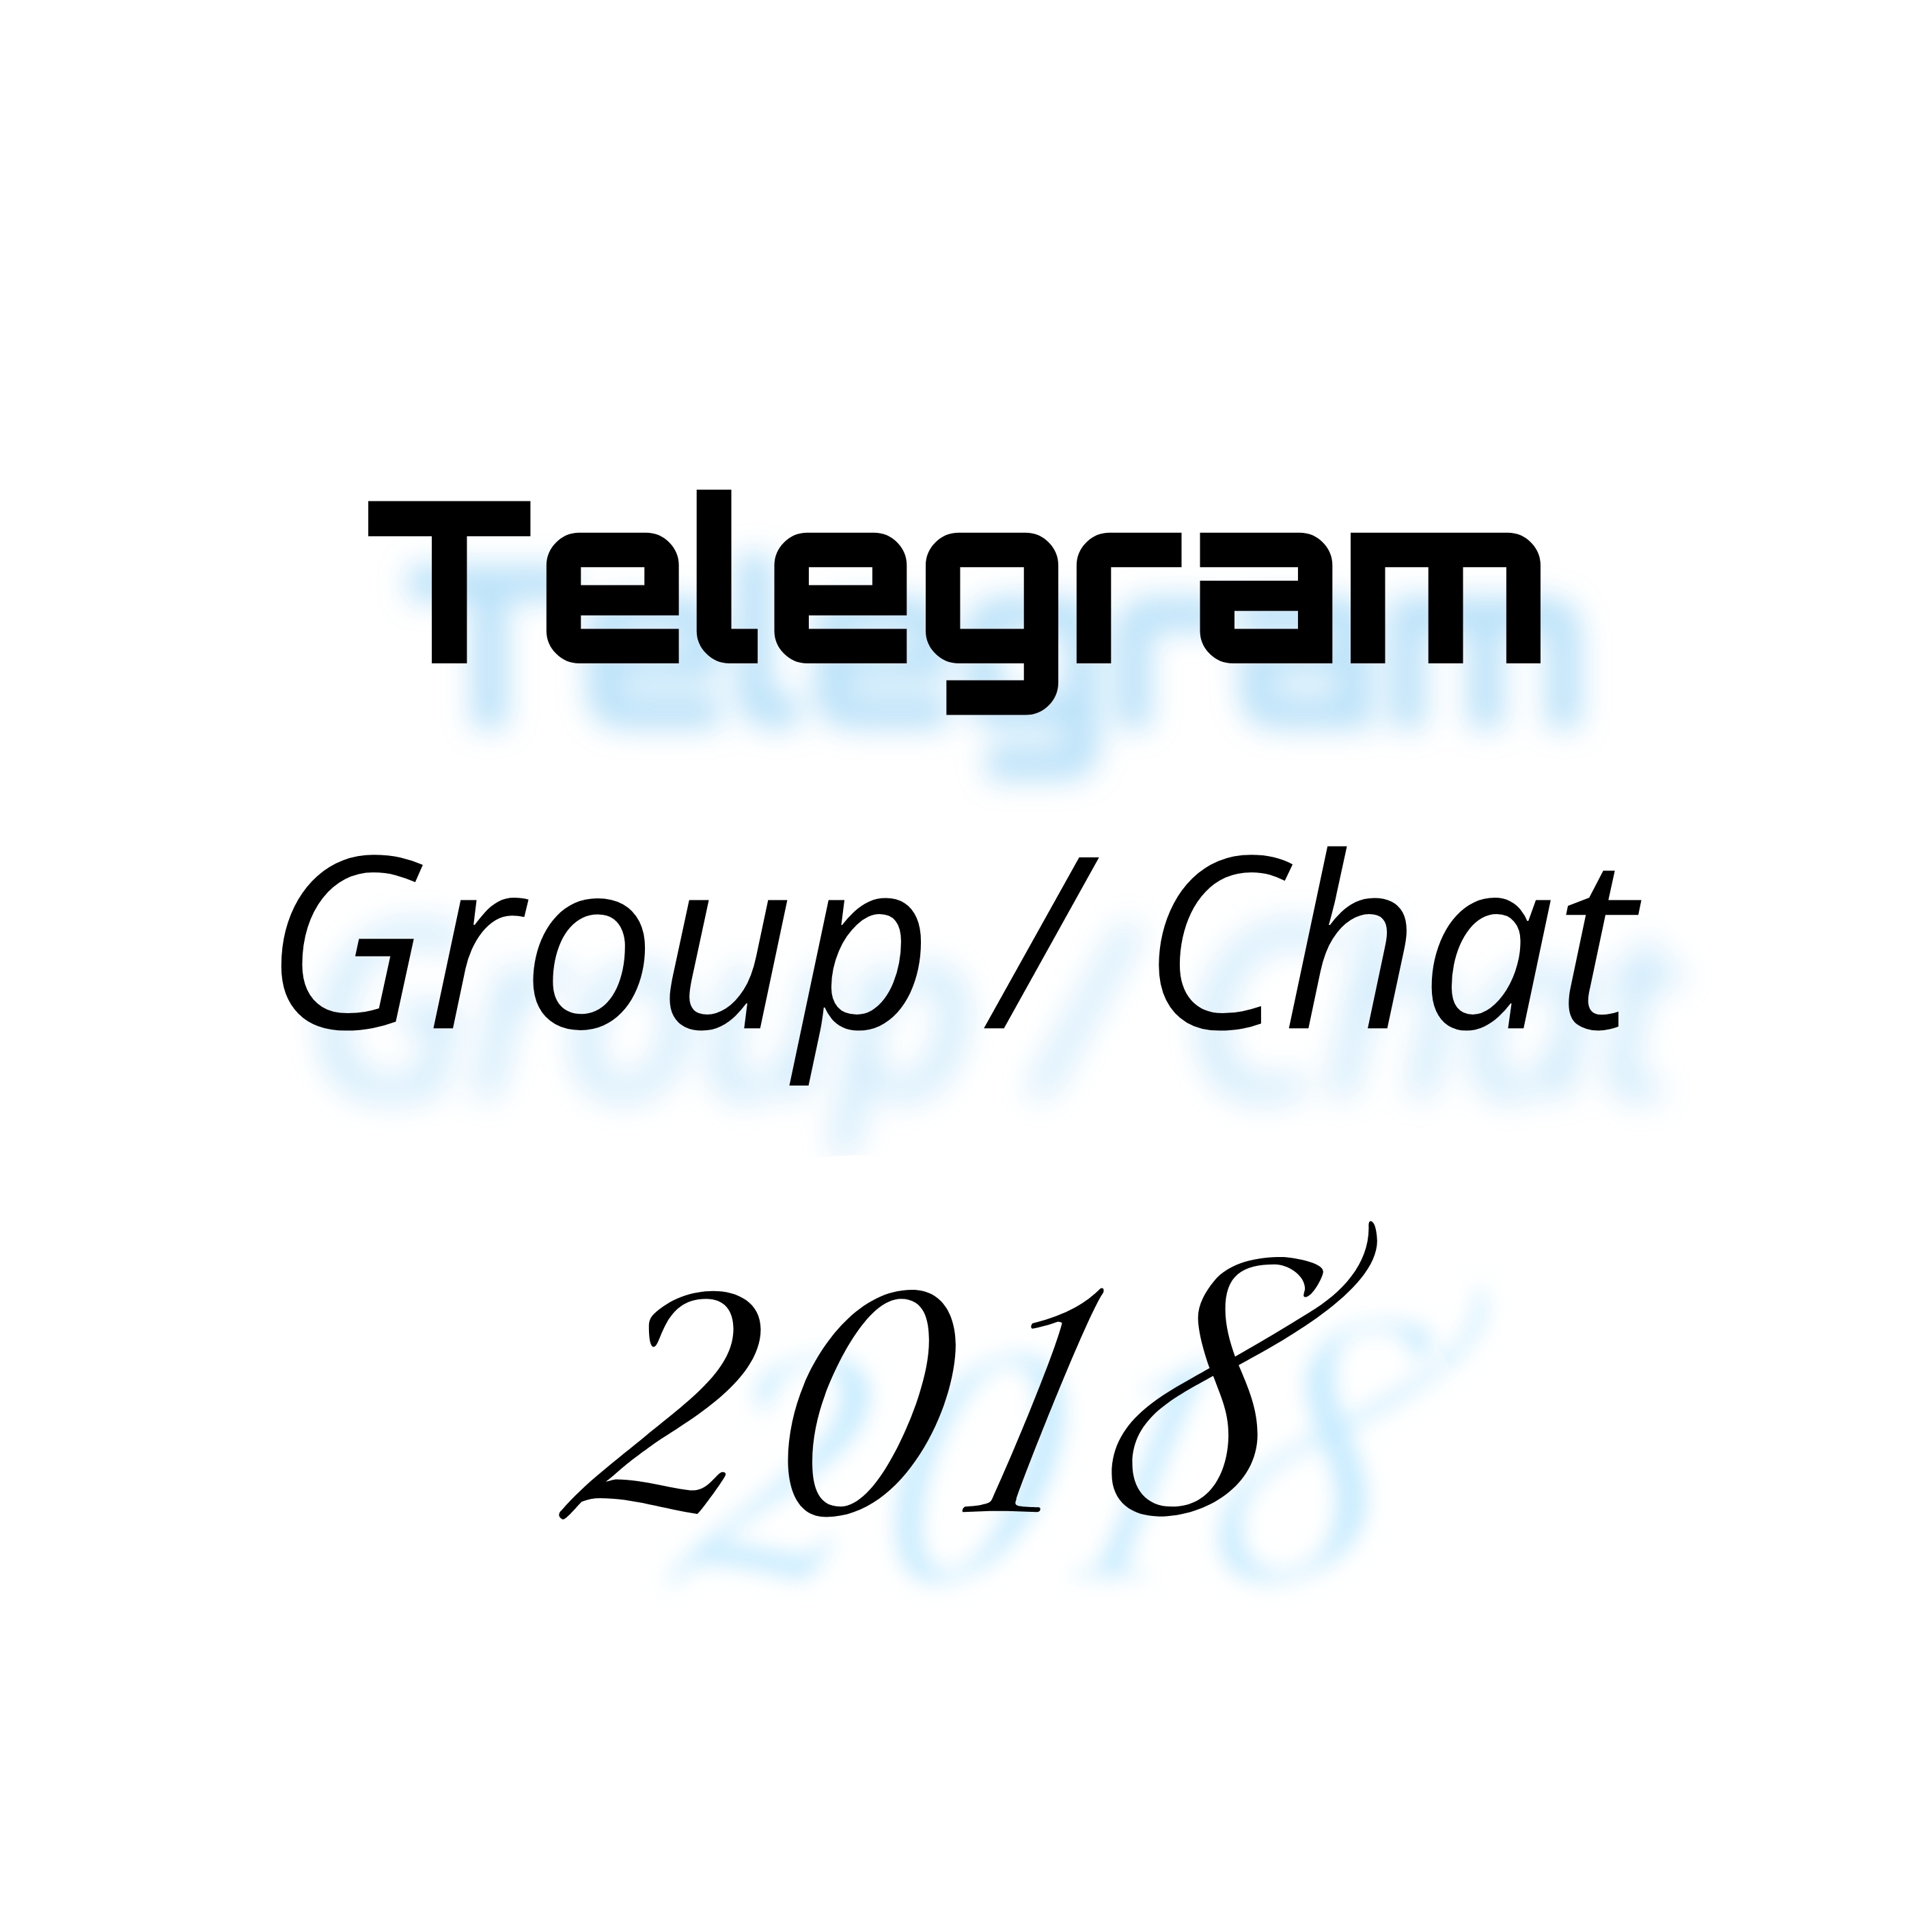 Group / Chat 2018